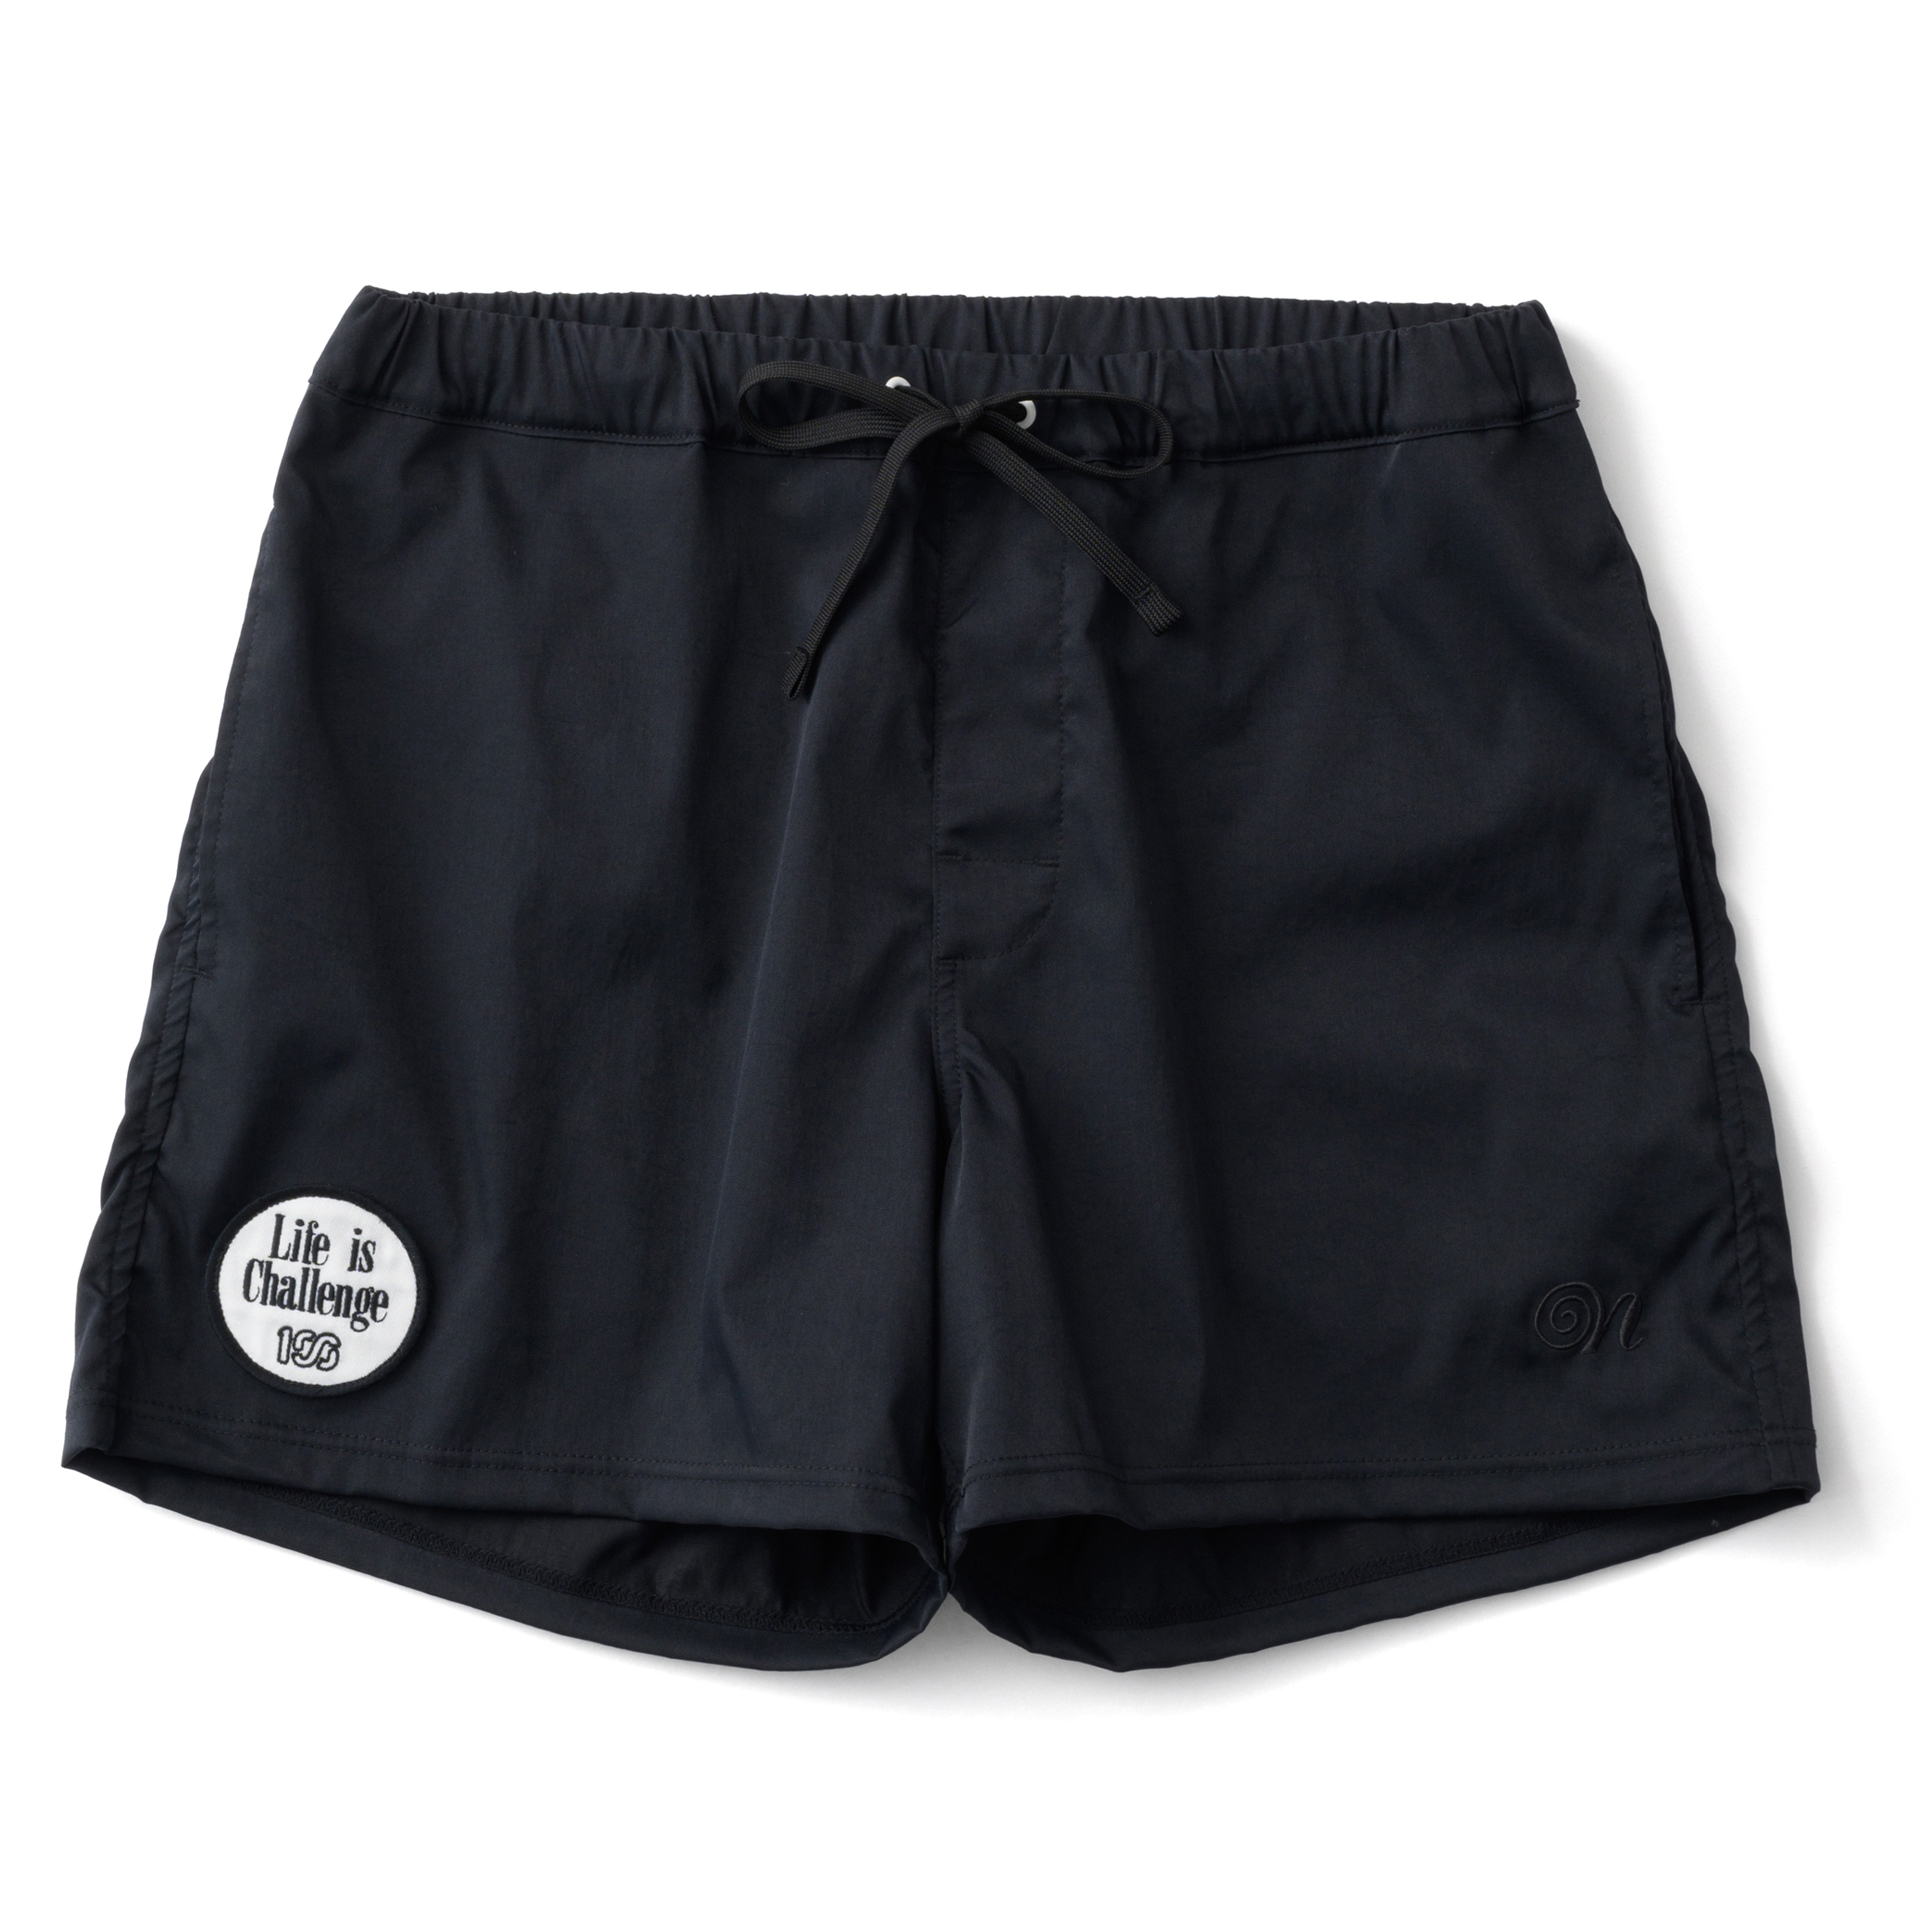 NALUTO TRUNKS x 100A SHORTS *Model "Everyday Everyone"